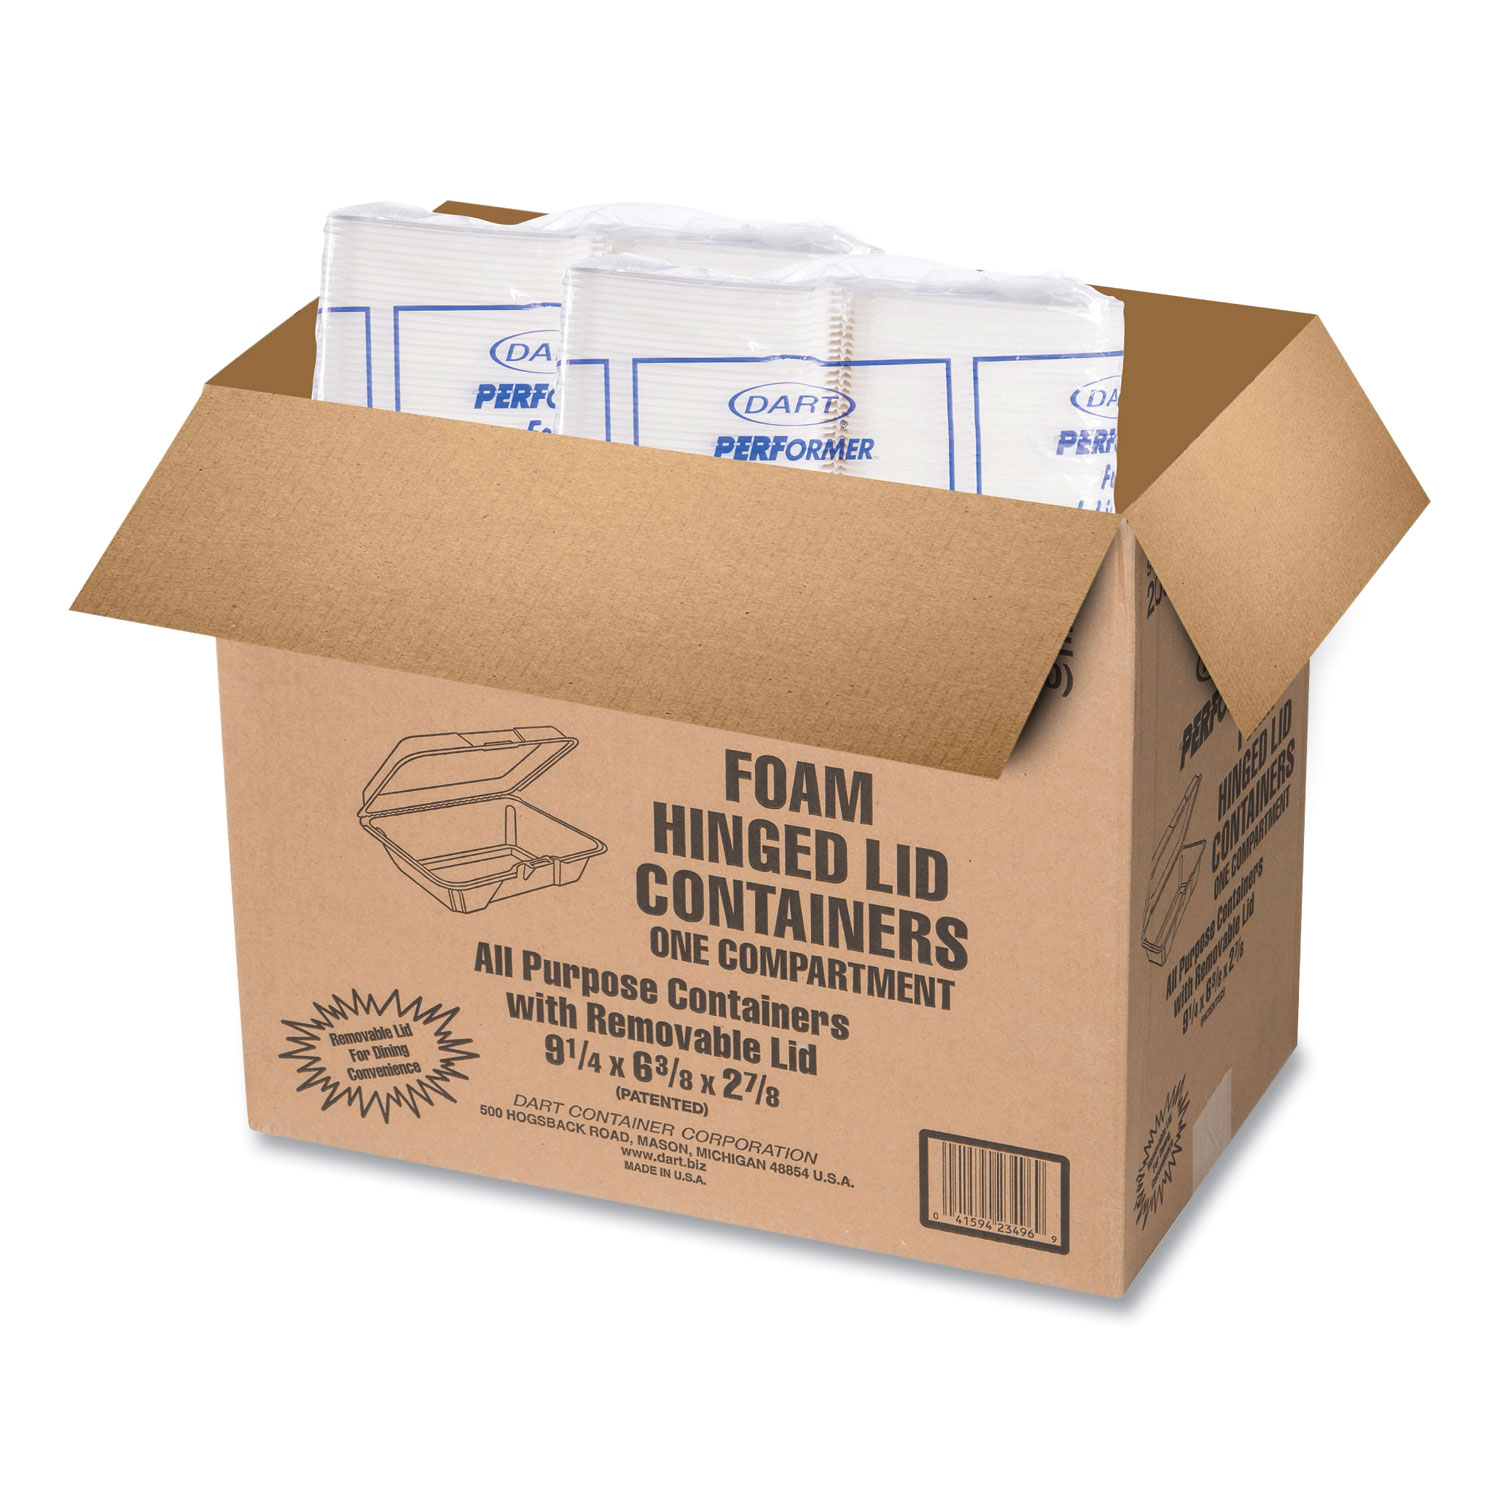 Dart Container 205HT1 Foam Hinged Lid Container 9.3 x 6.4 x 2.9, White,  Extruded Polystyrene, 1